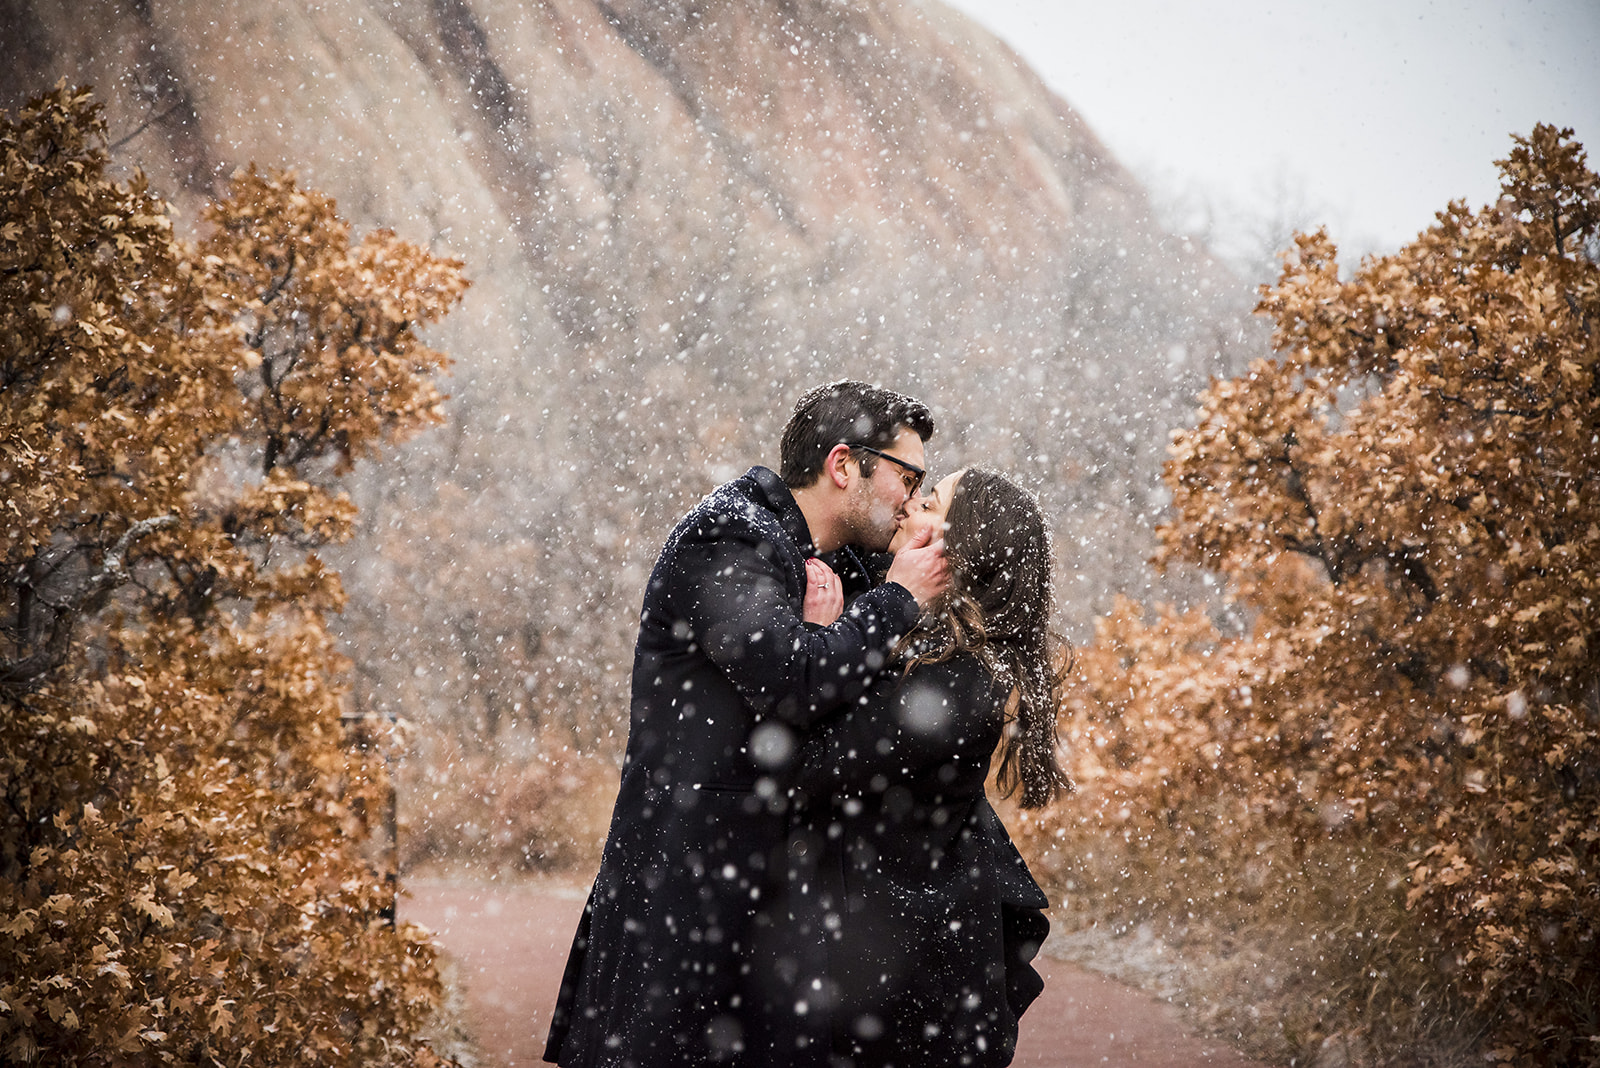 Couple kisses each other in the snow with red rock mountain formation behind them.